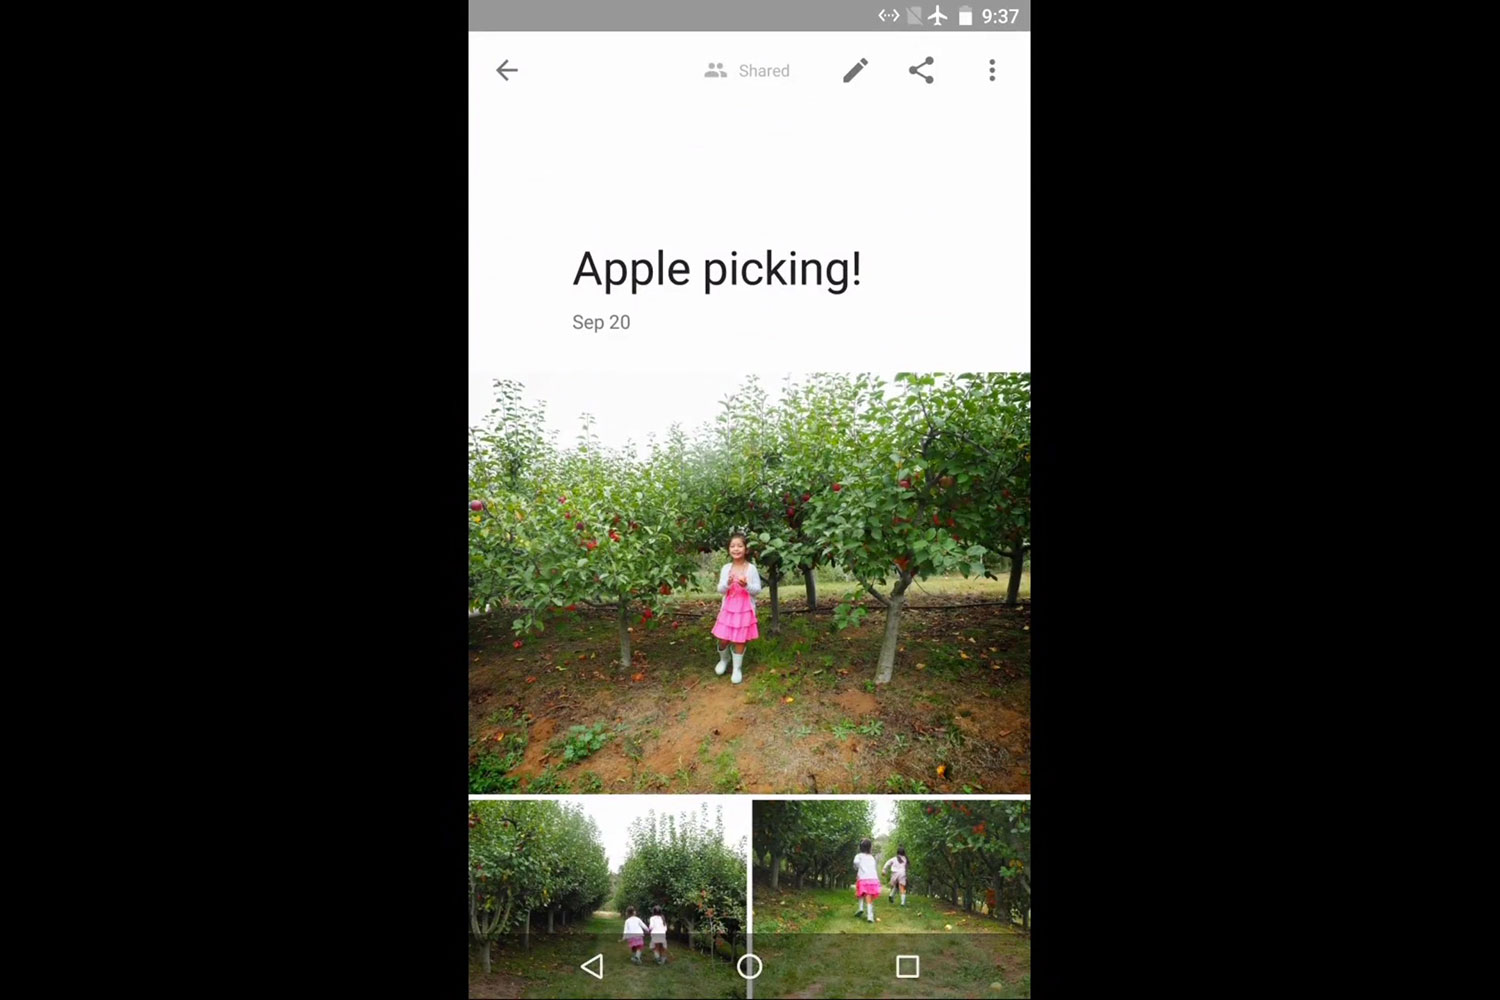 google photos new features shared 0023